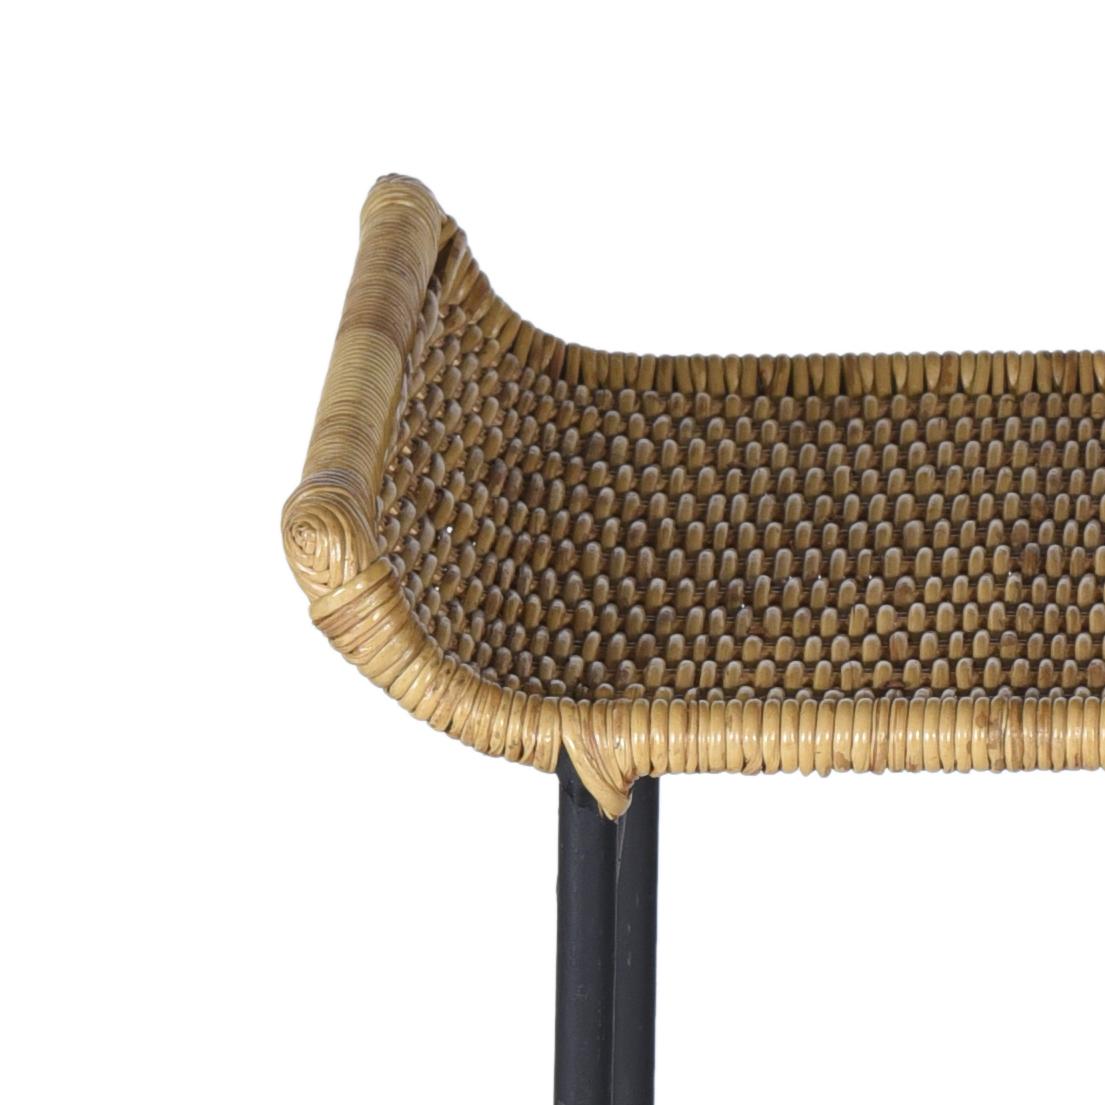 Brazilian Midcentury brazilian Stool w/ Structure in Metal and Reed by unknown author, 50s